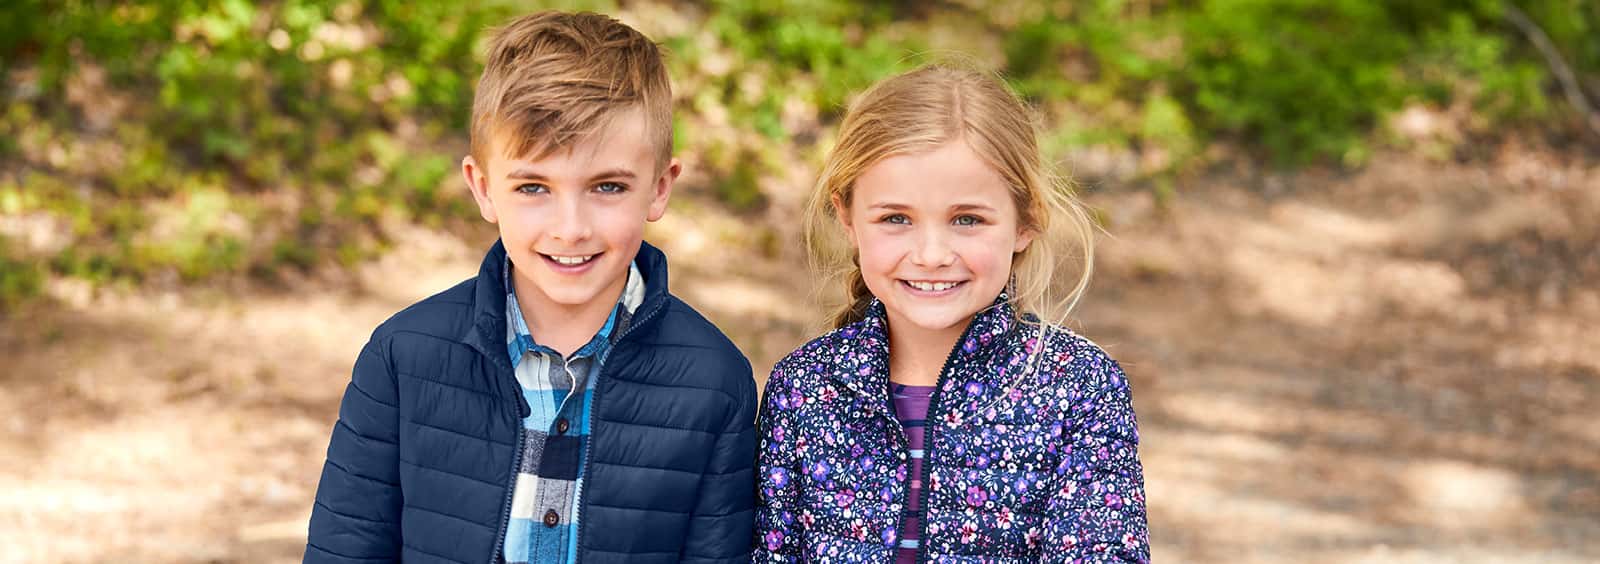 Cute Jackets for Fall Your Kids Would Love to Wear